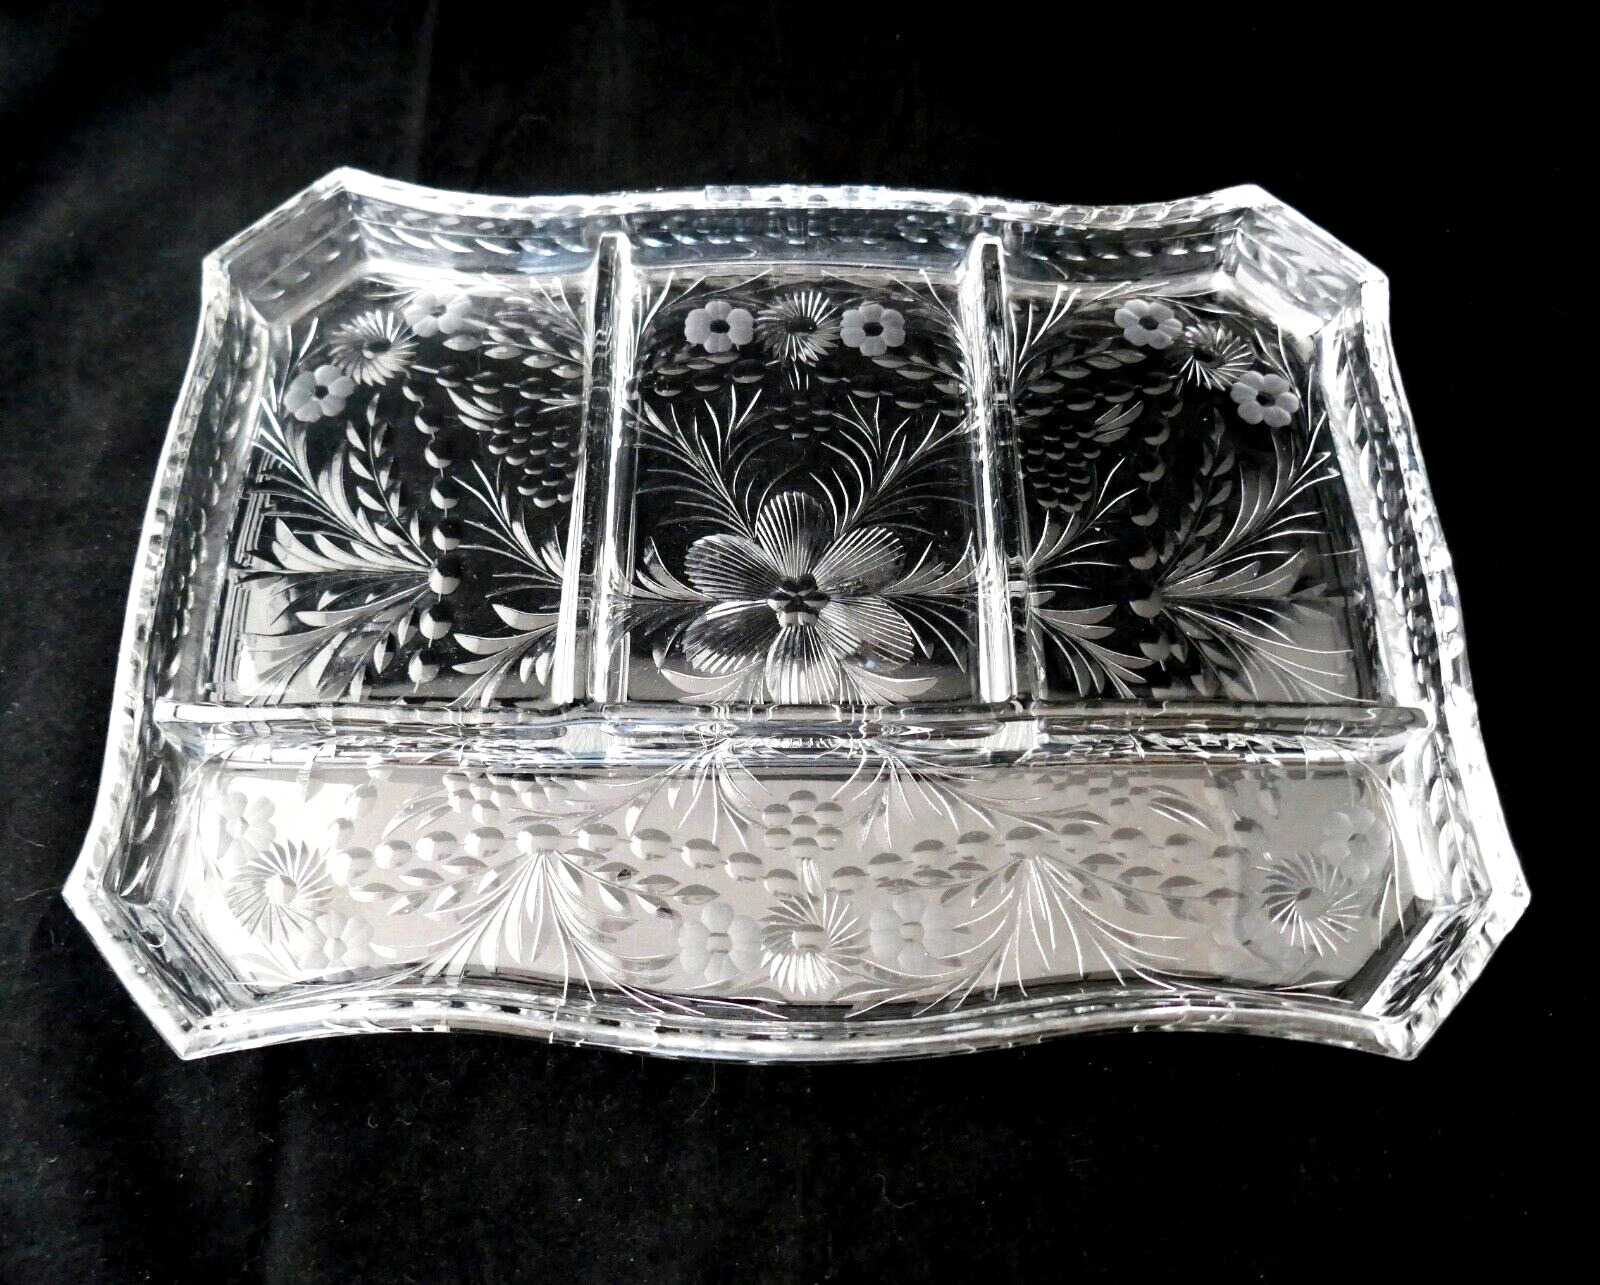 Antique Vanity Dresser Compartment Tray Plate Cut Crystal Engraved Flowers